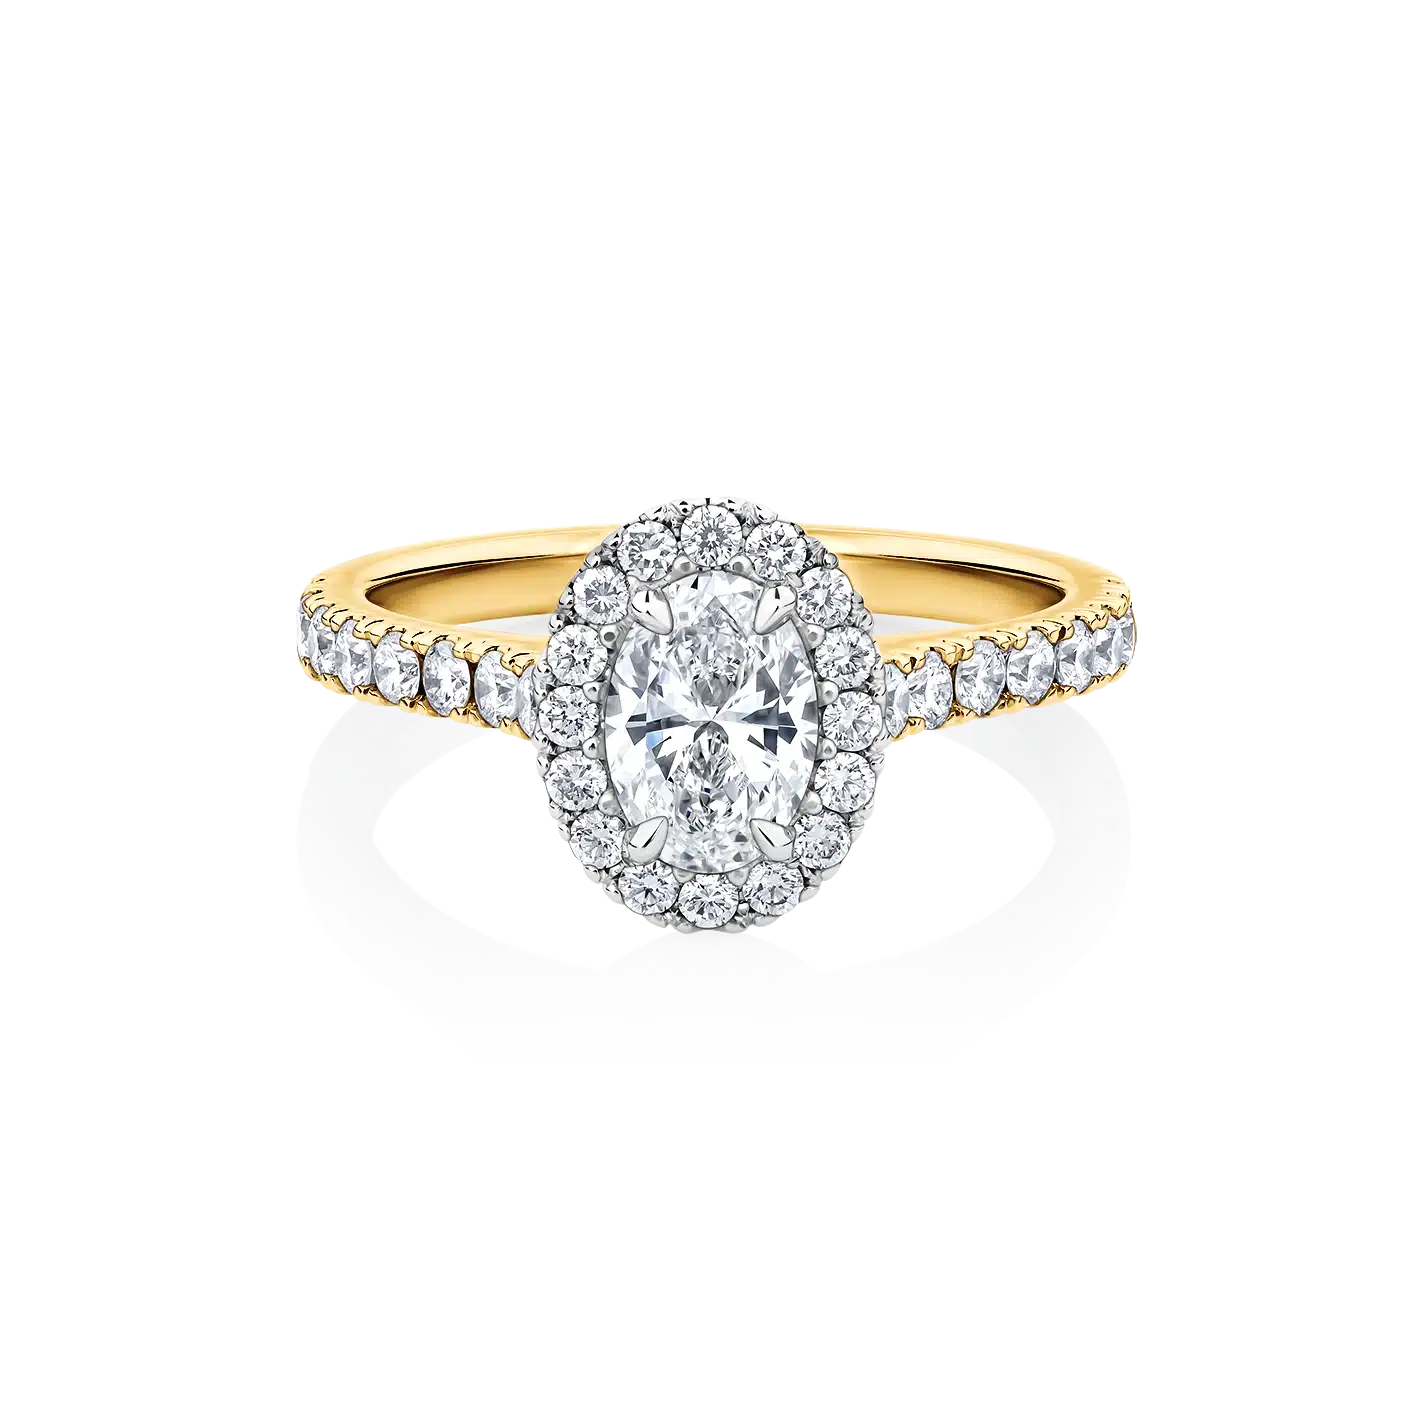 Wattle-Oval-Yellow-Gold-Two-Tone-Halo-Oval-Diamond-Engagement-Ring